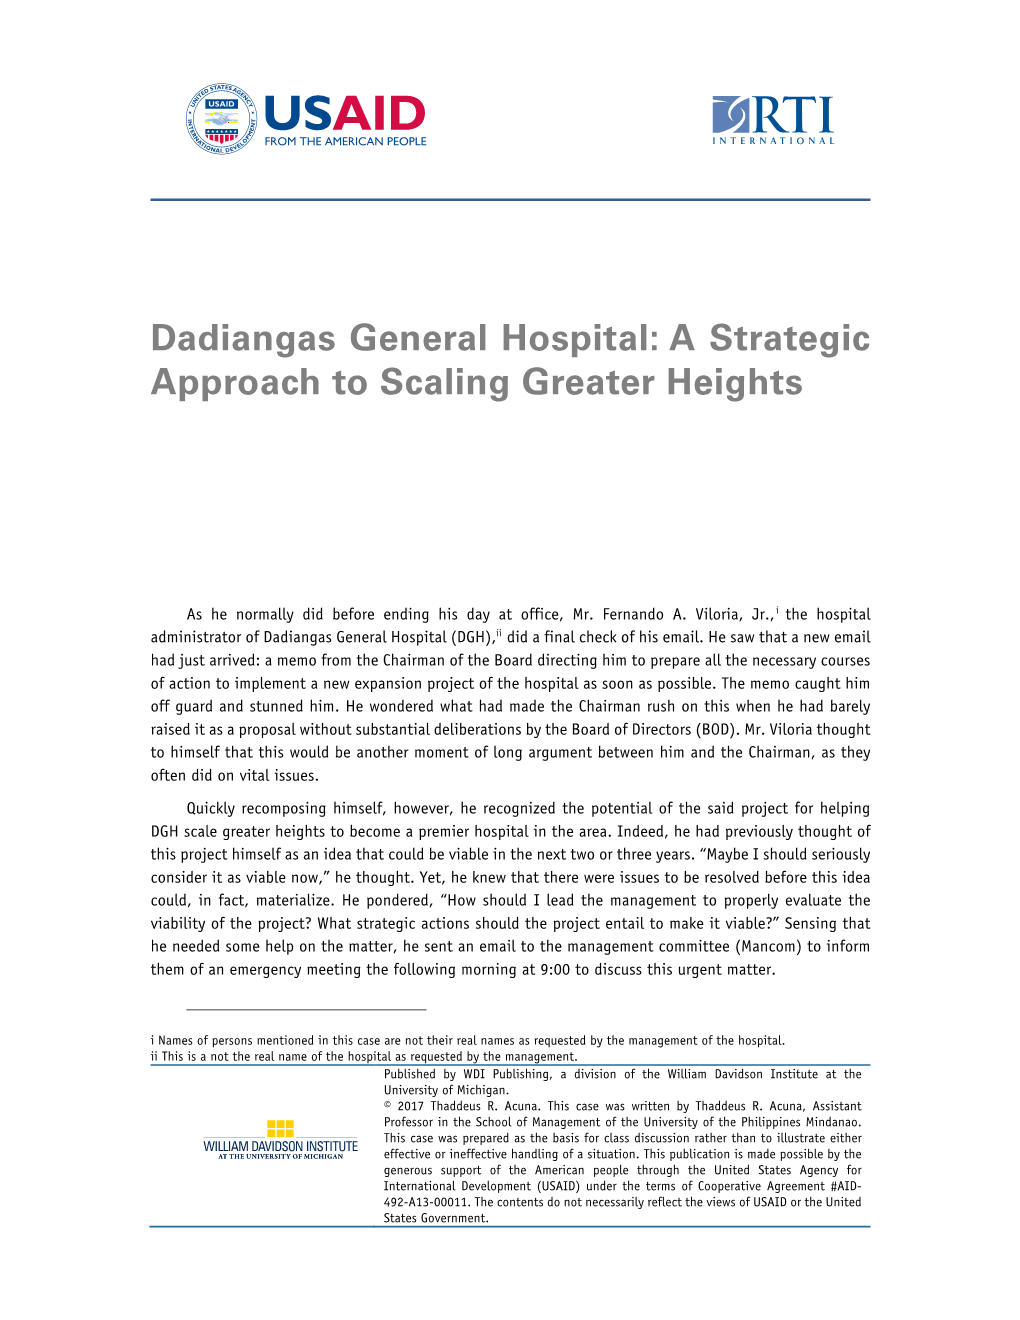 Dadiangas General Hospital: a Strategic Approach to Scaling Greater Heights